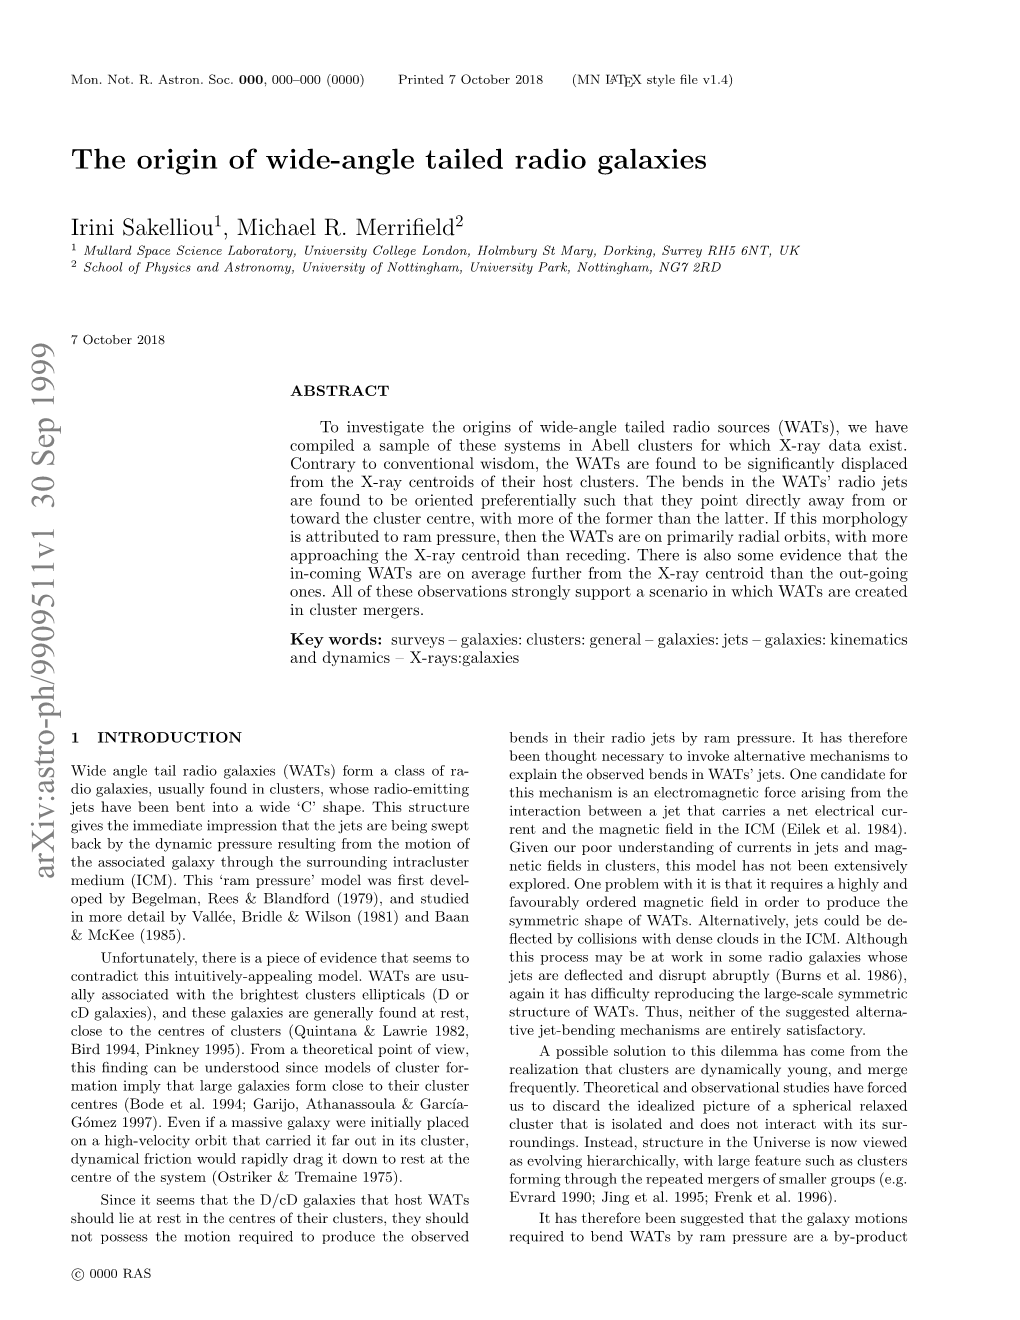 The Origin of Wide-Angle Tailed Radio Galaxies